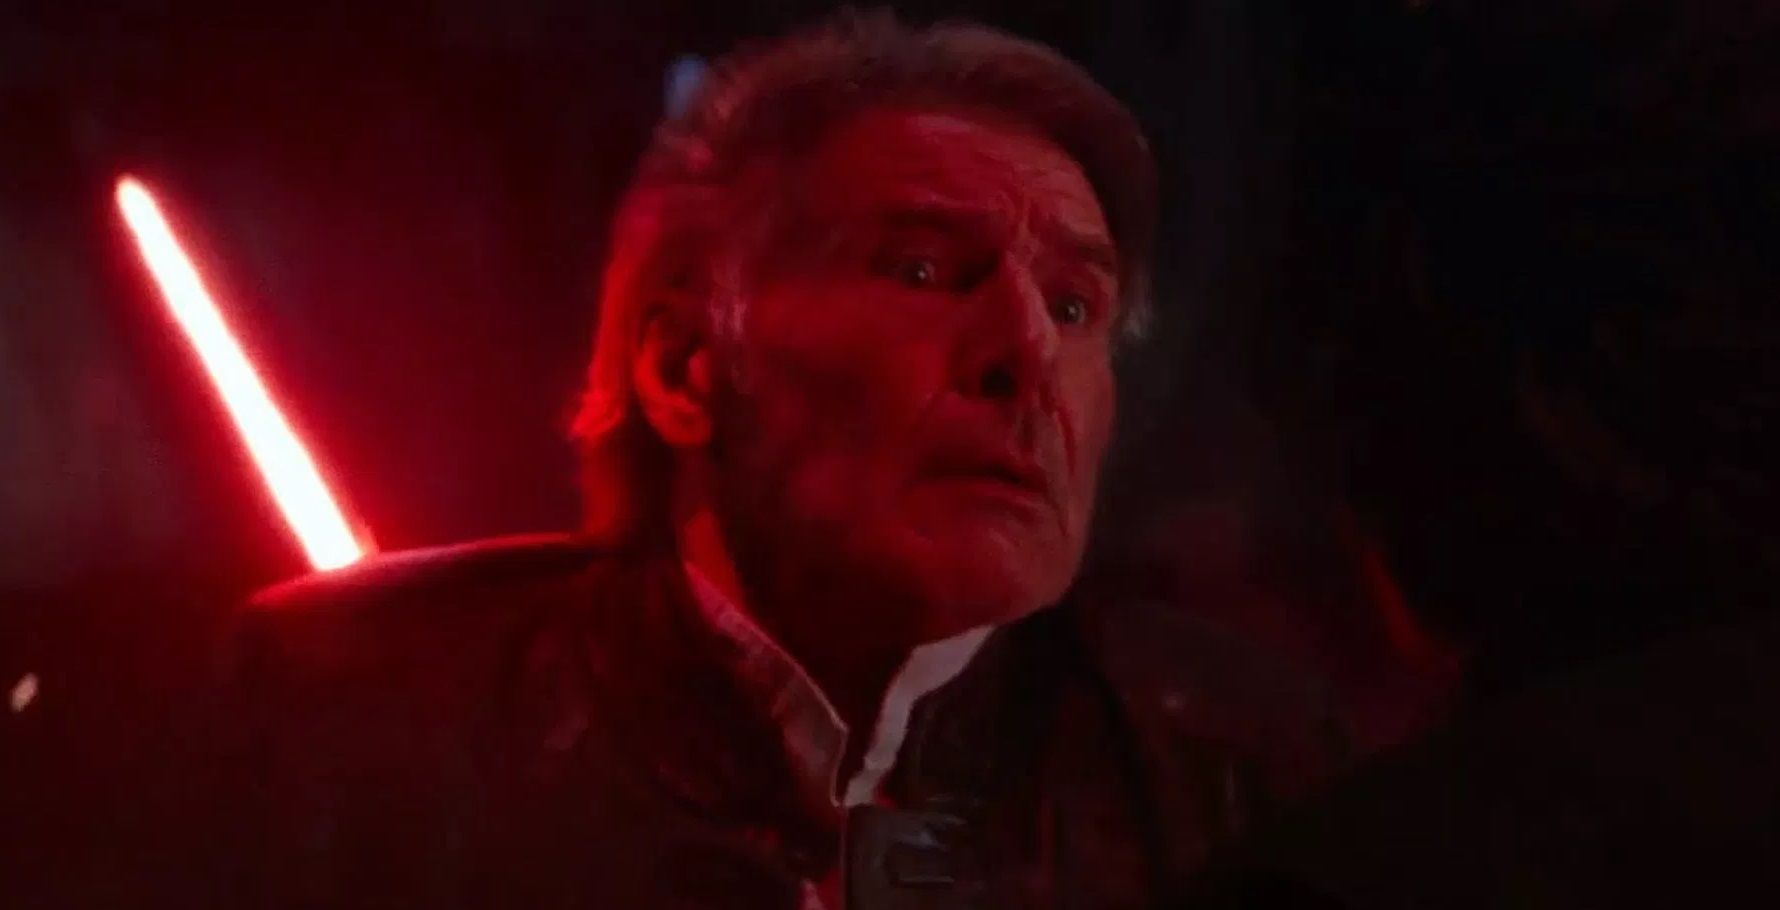 Han Solo gets killed by Ren in Star Wars The Force Awakens